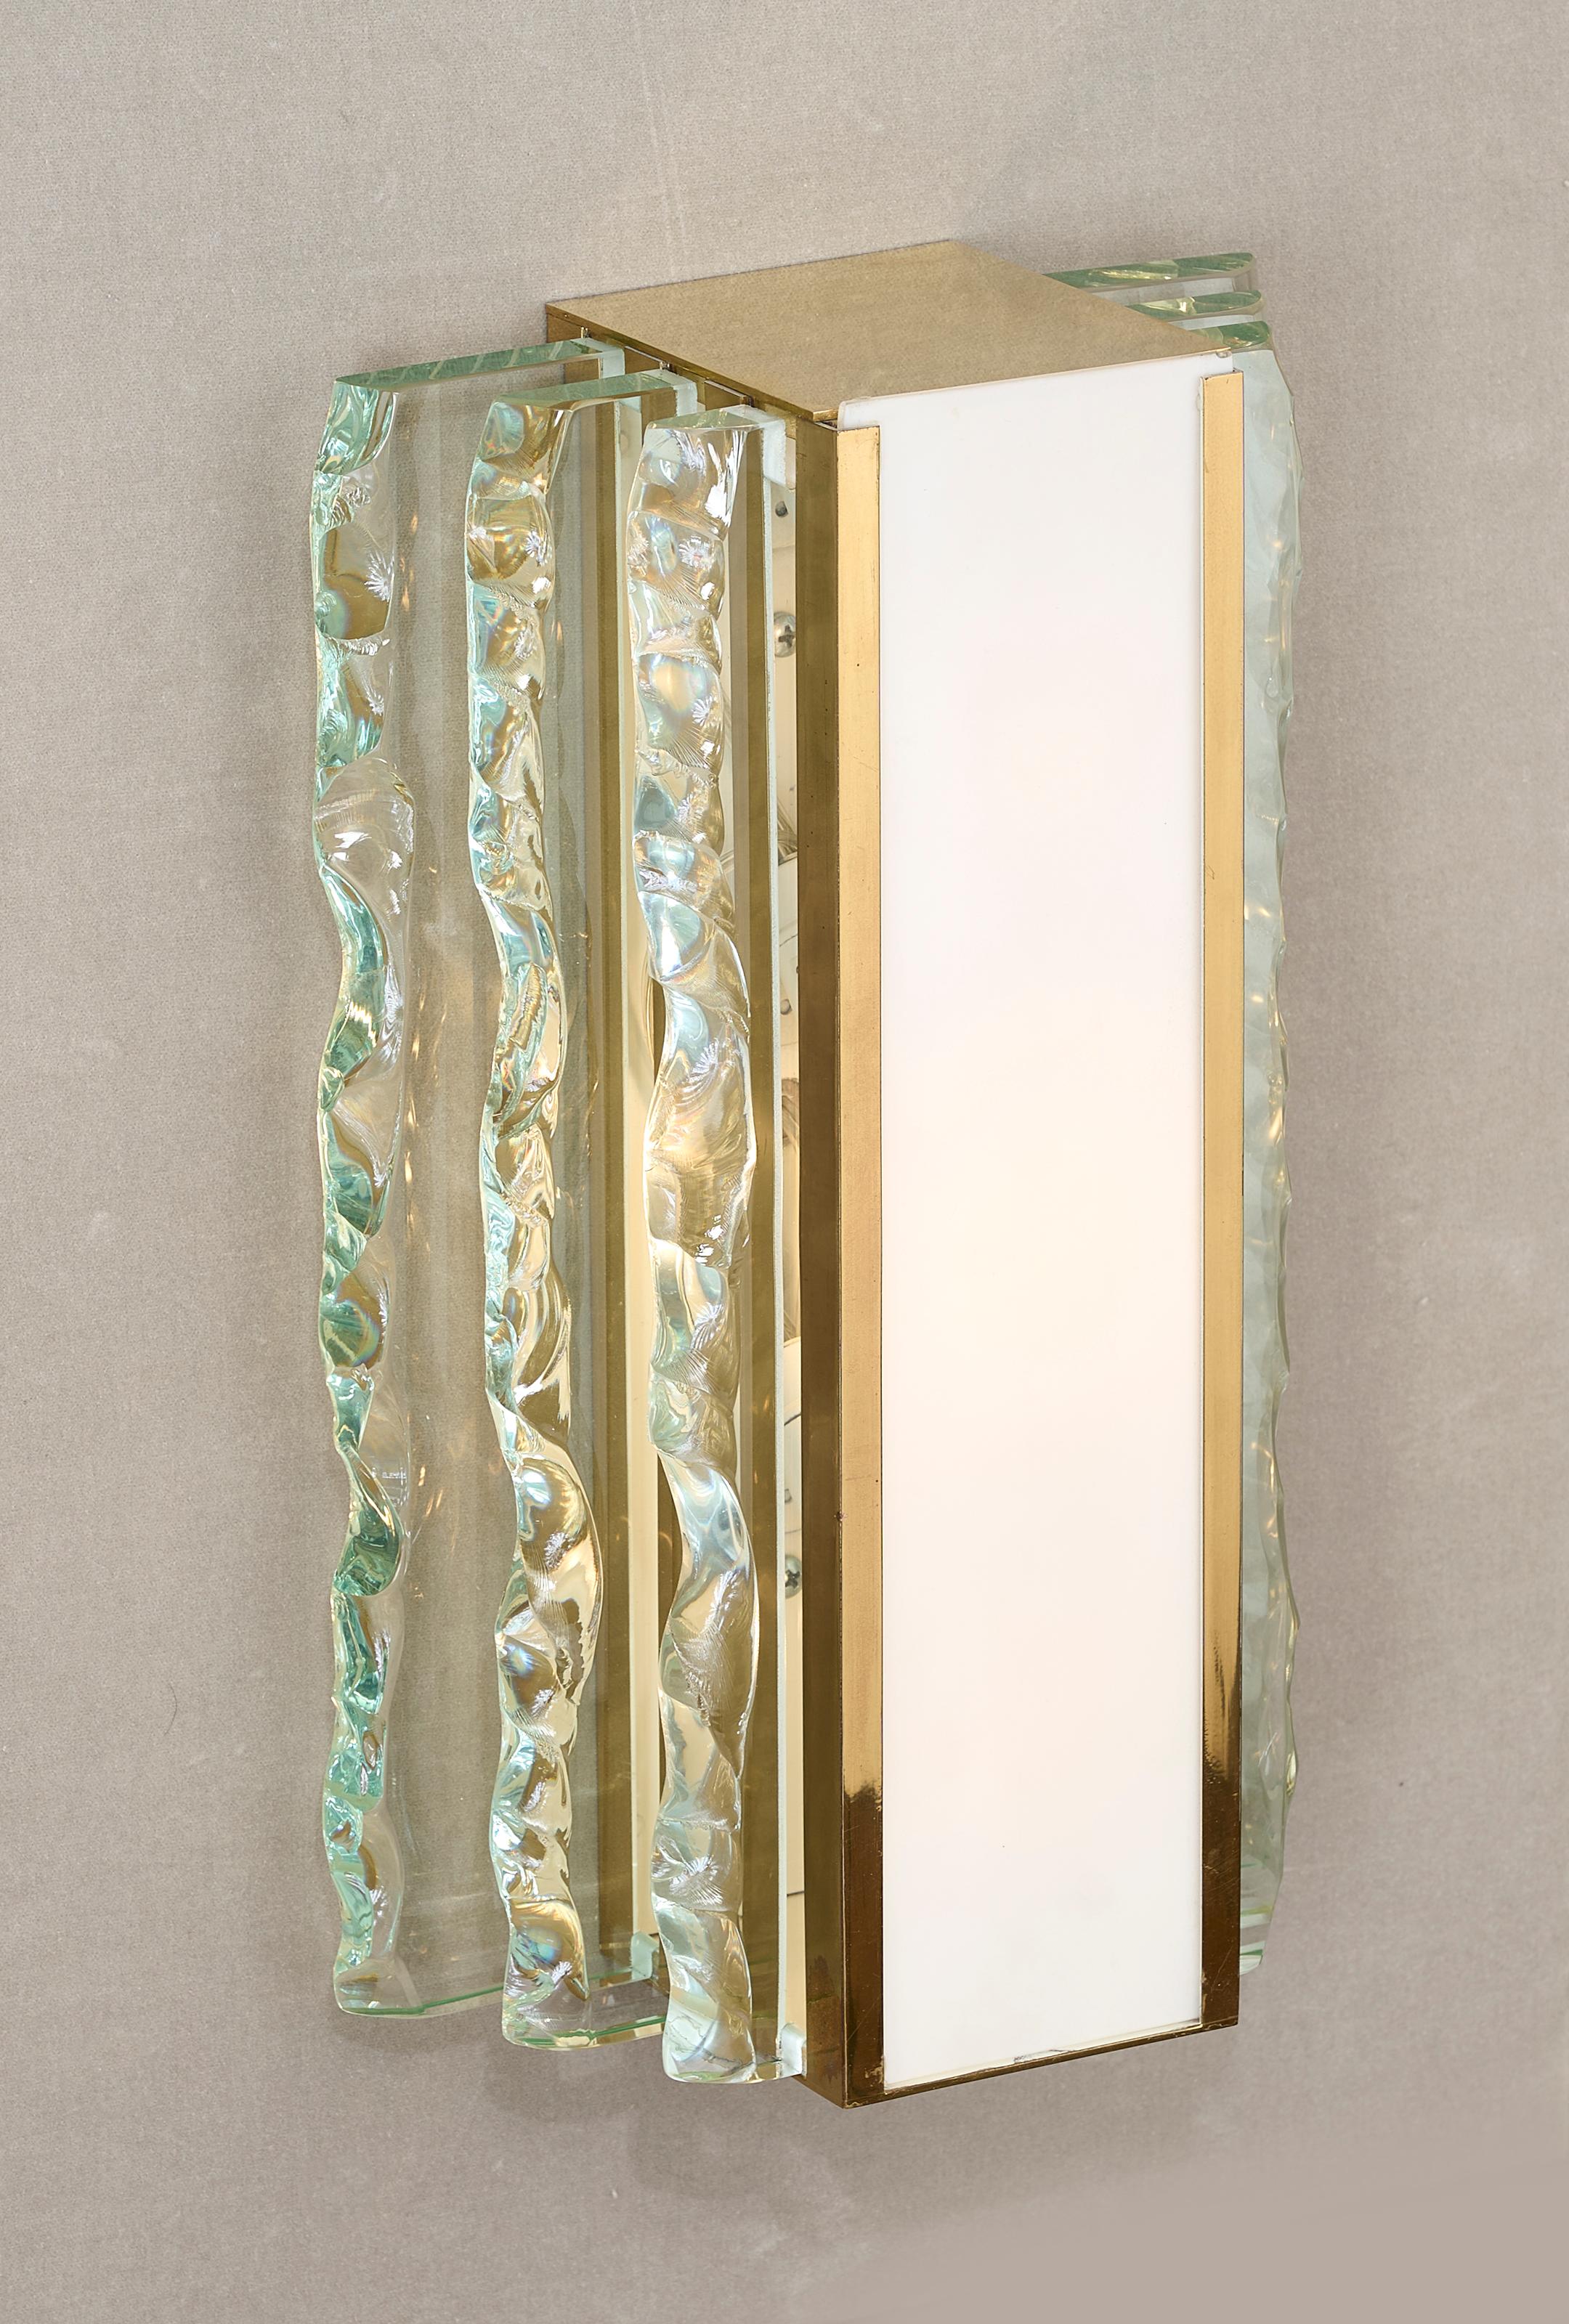 Max Ingrand for Fontana Arte: Pair of Cut Crystal and Brass Sconces, Italy 1954 For Sale 4